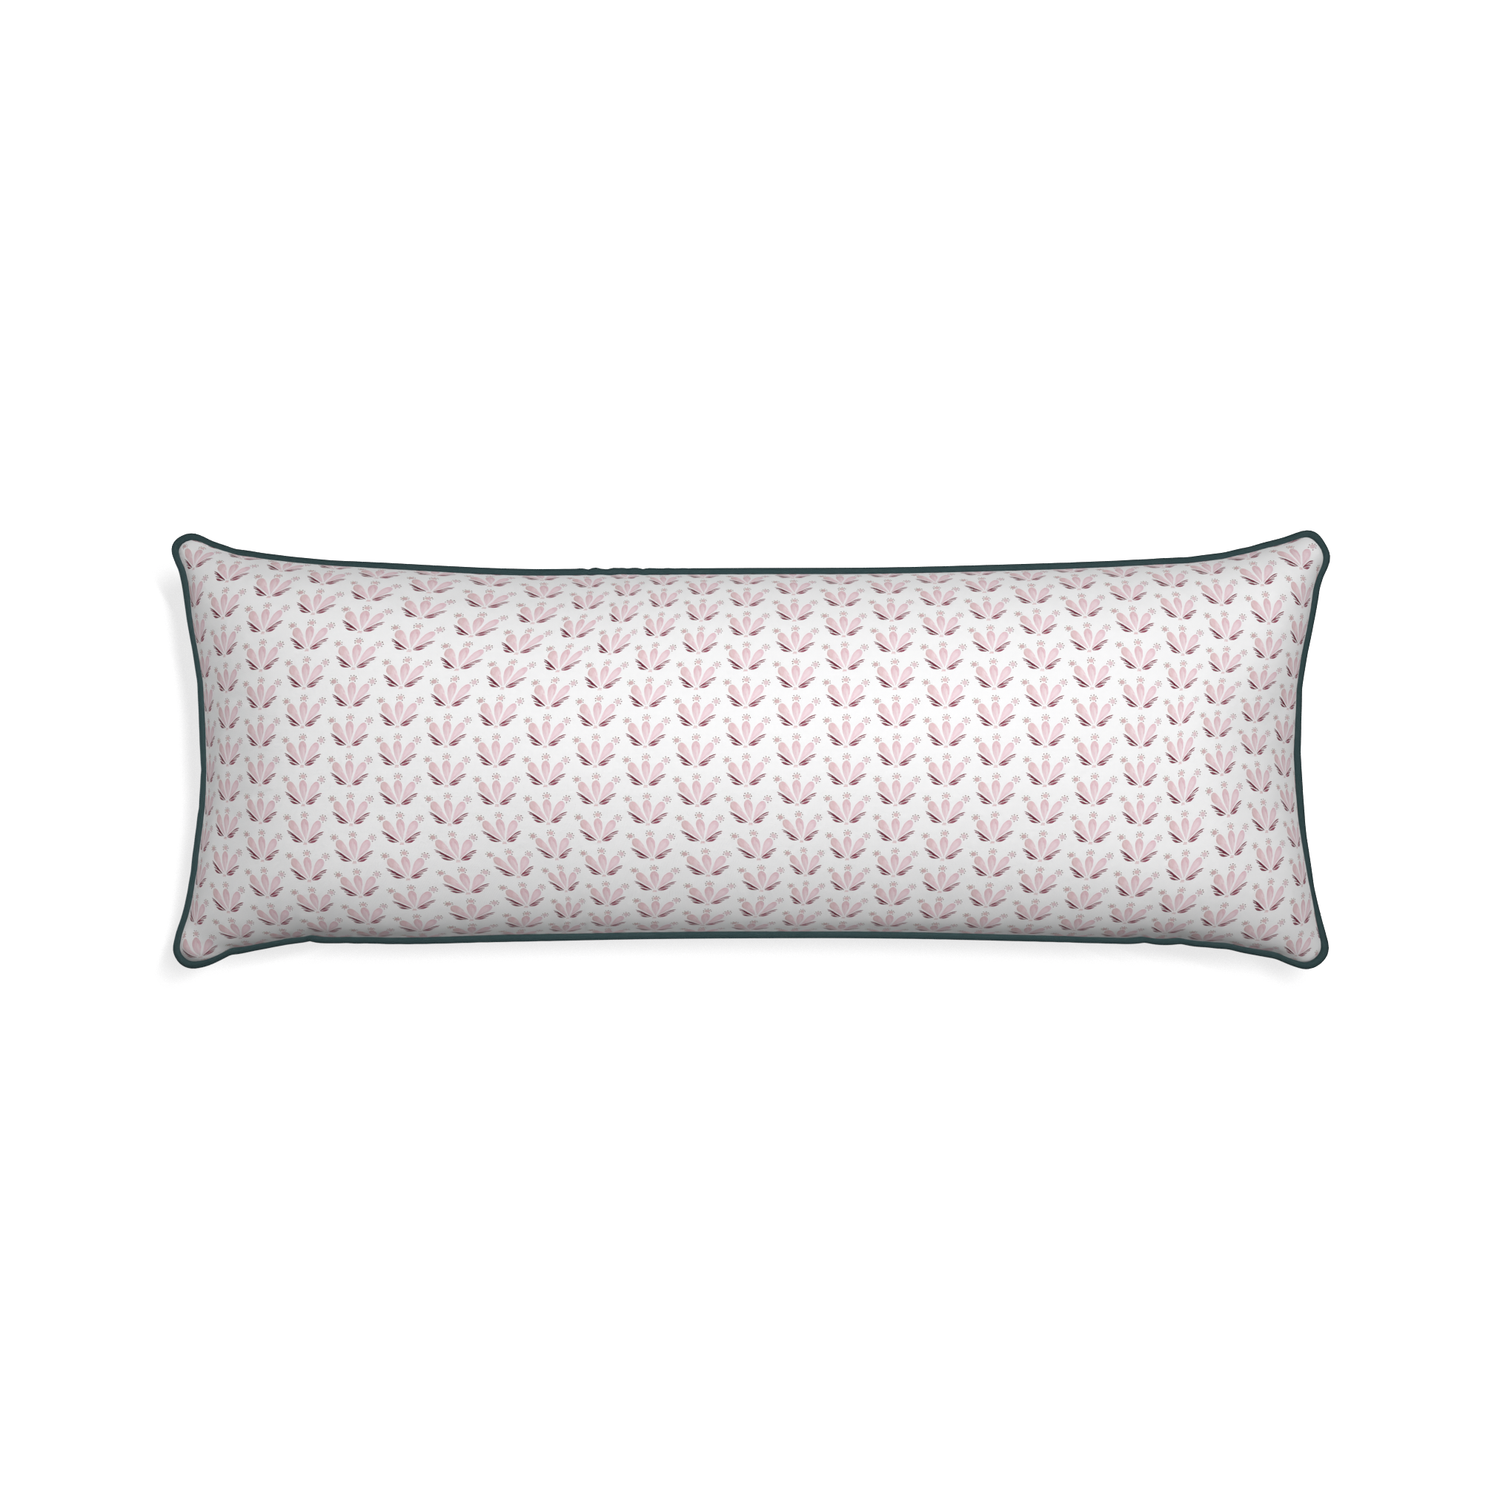 Xl-lumbar serena pink custom pink & burgundy drop repeat floralpillow with p piping on white background